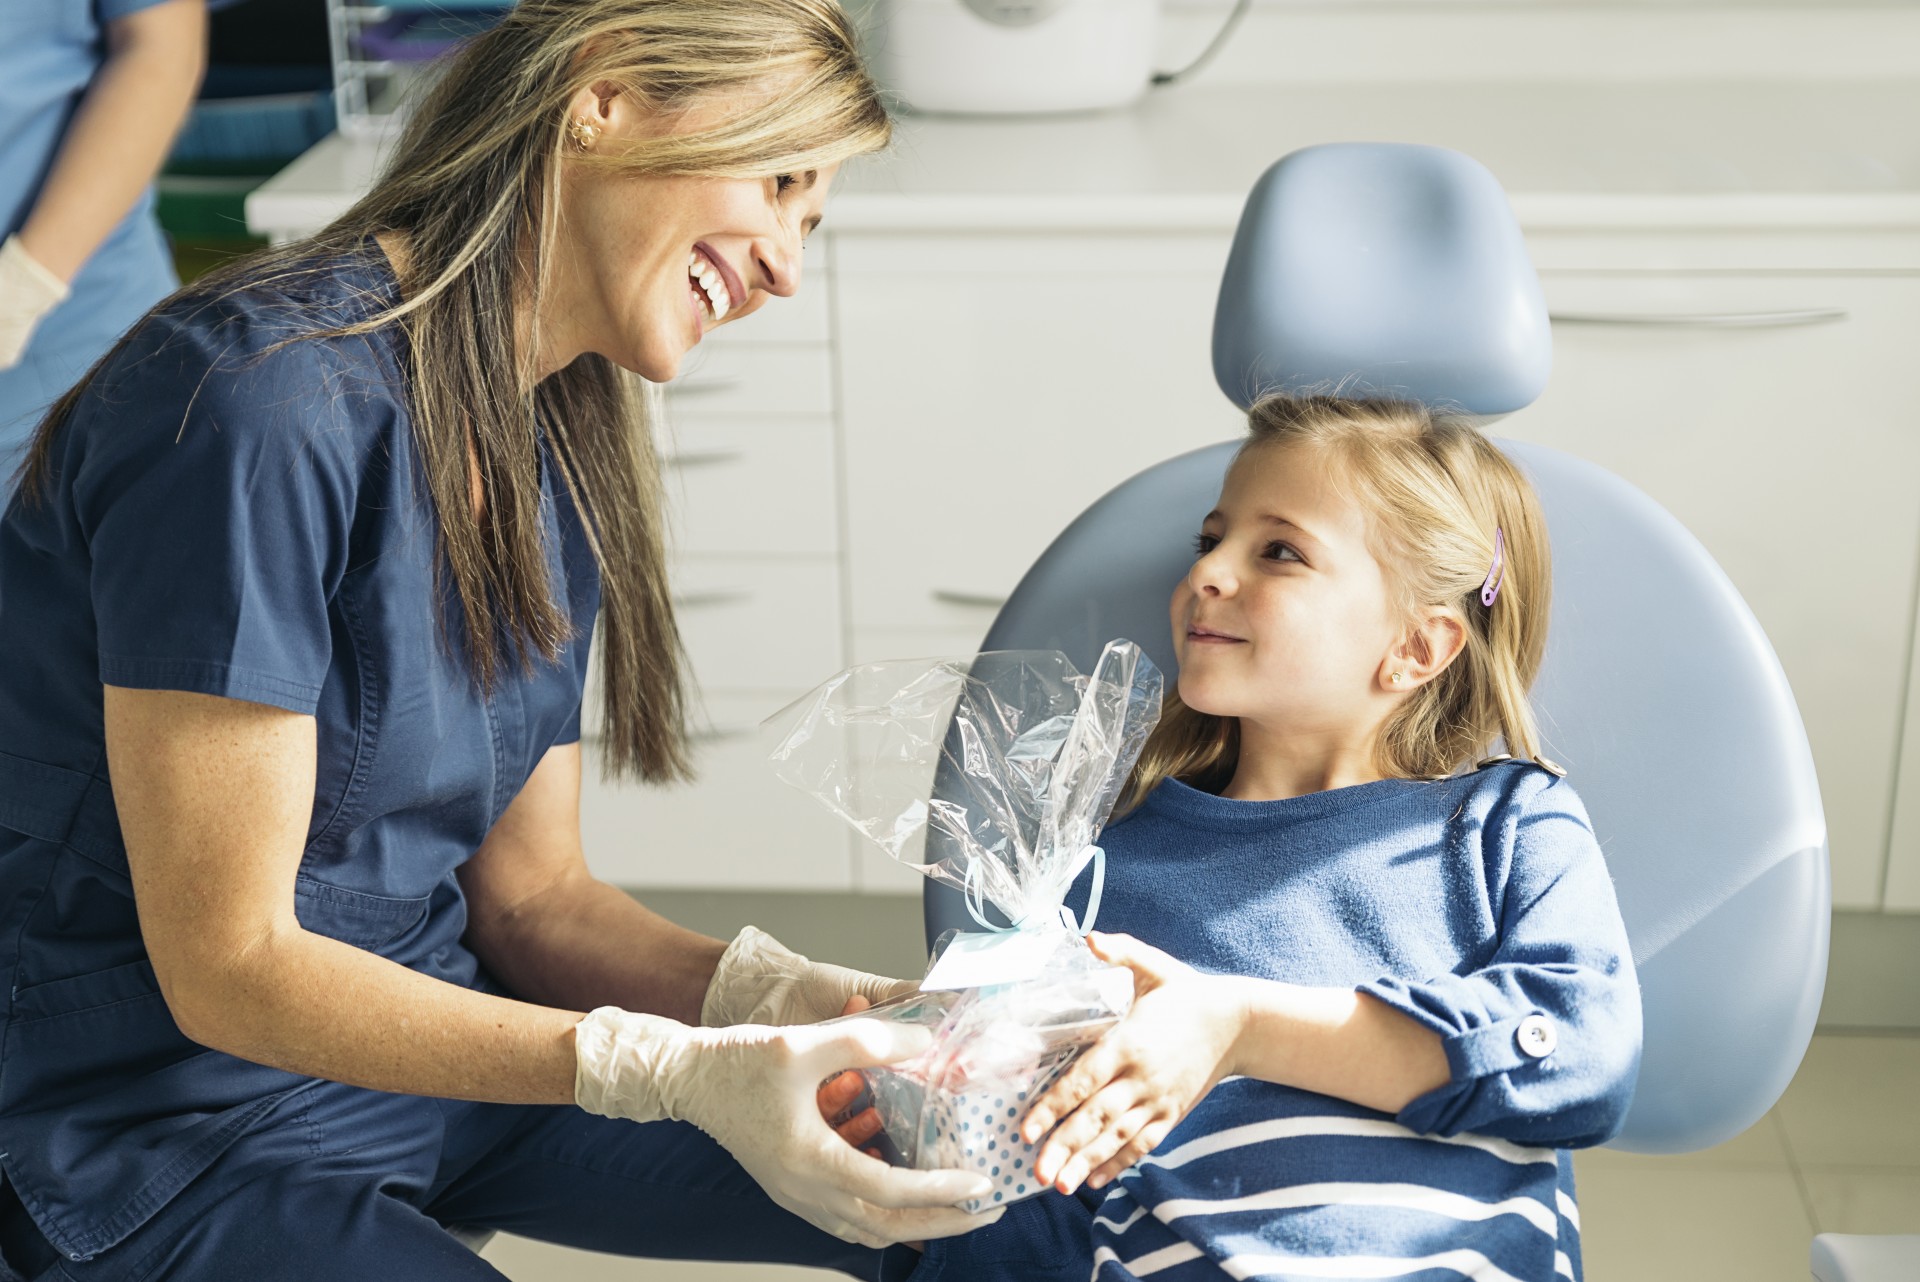 Dentist Giving To Others